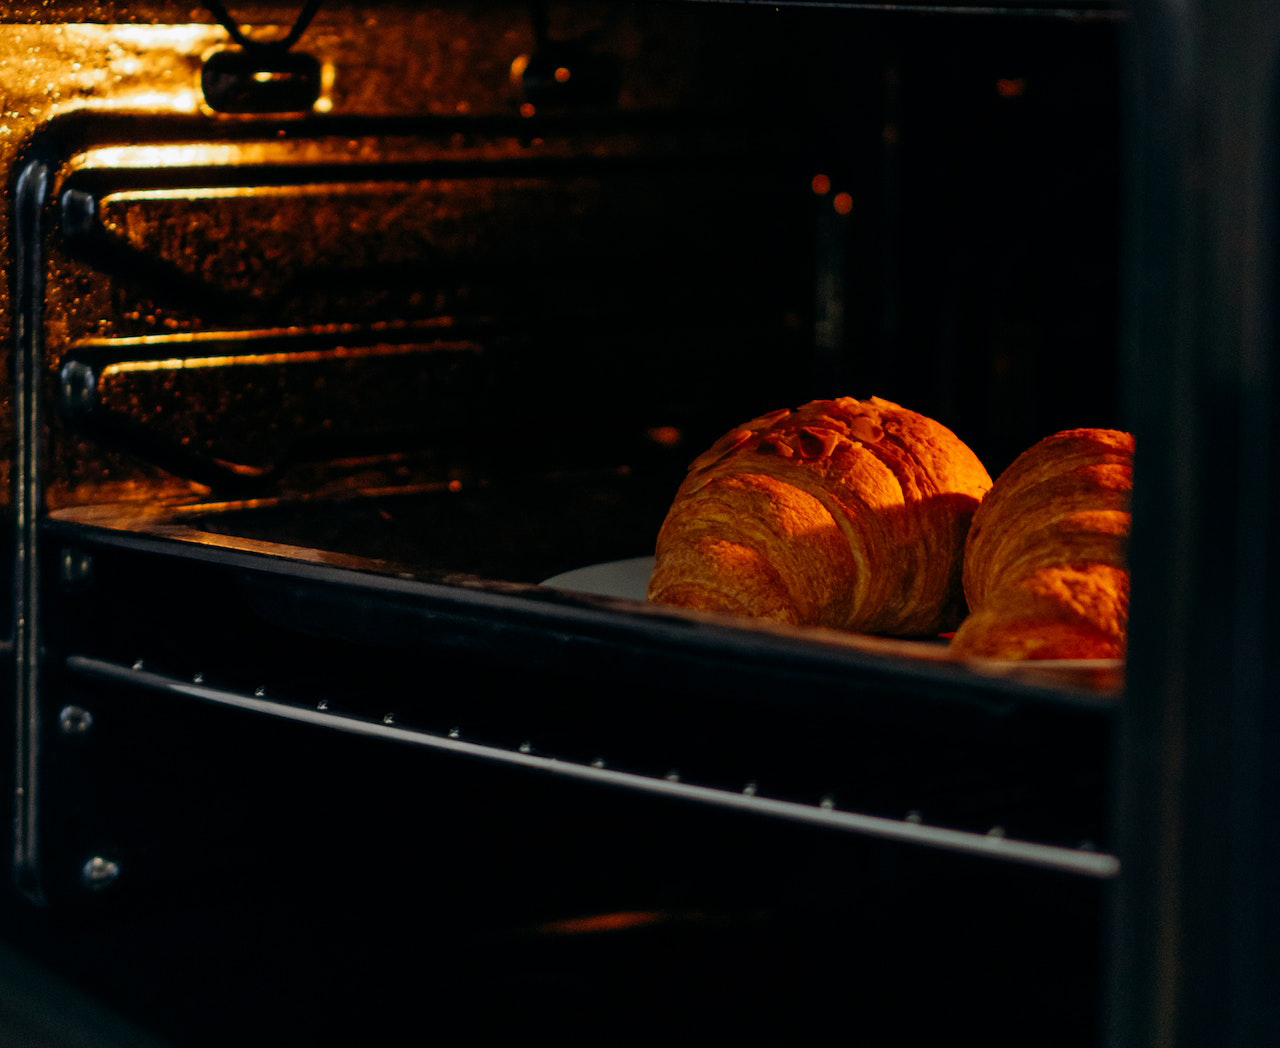 croissant in an oven